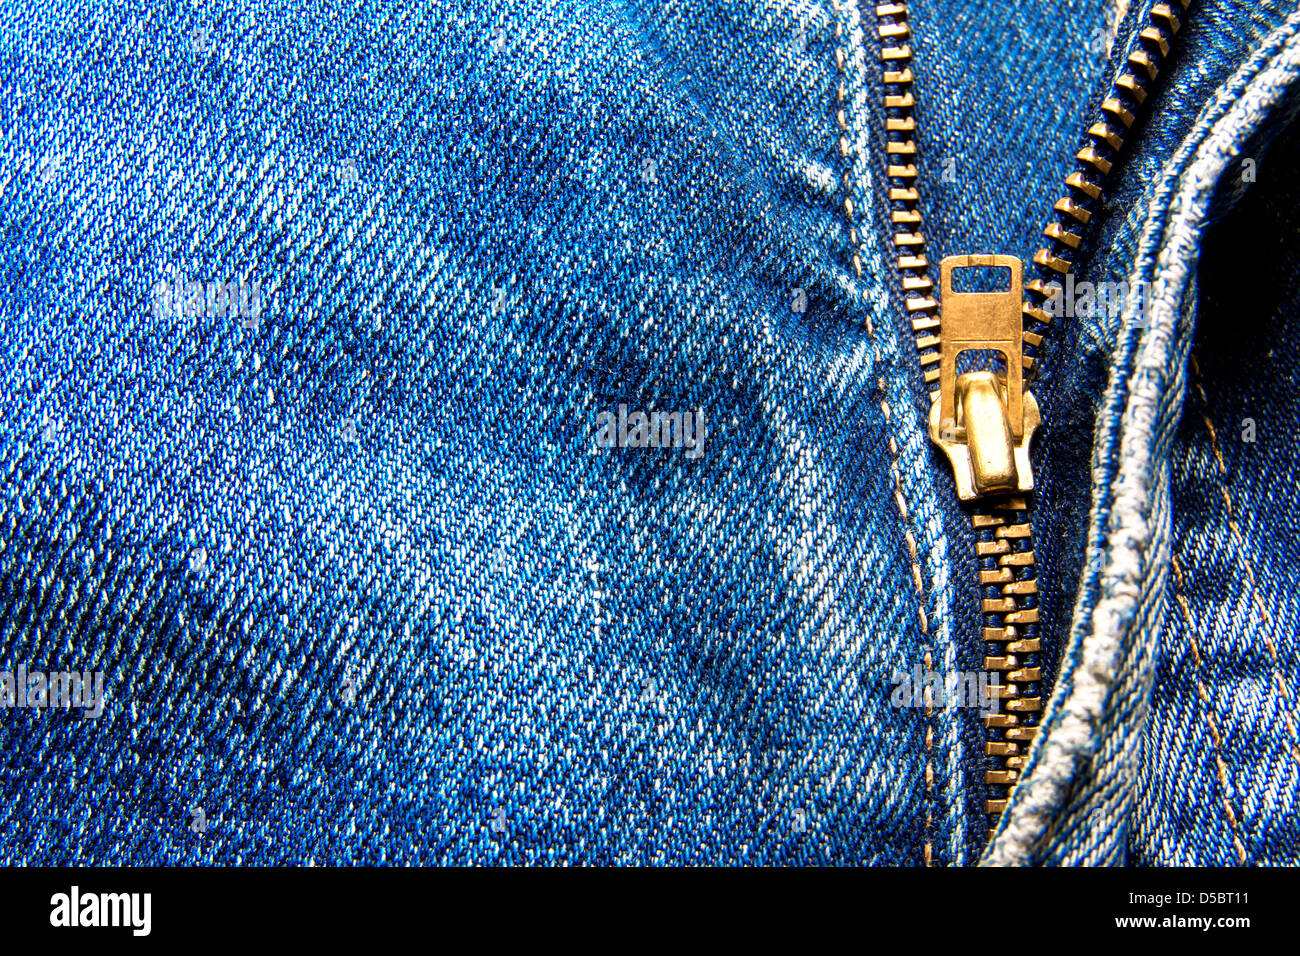 Detail of zipper on blue jeans close up Stock Photo